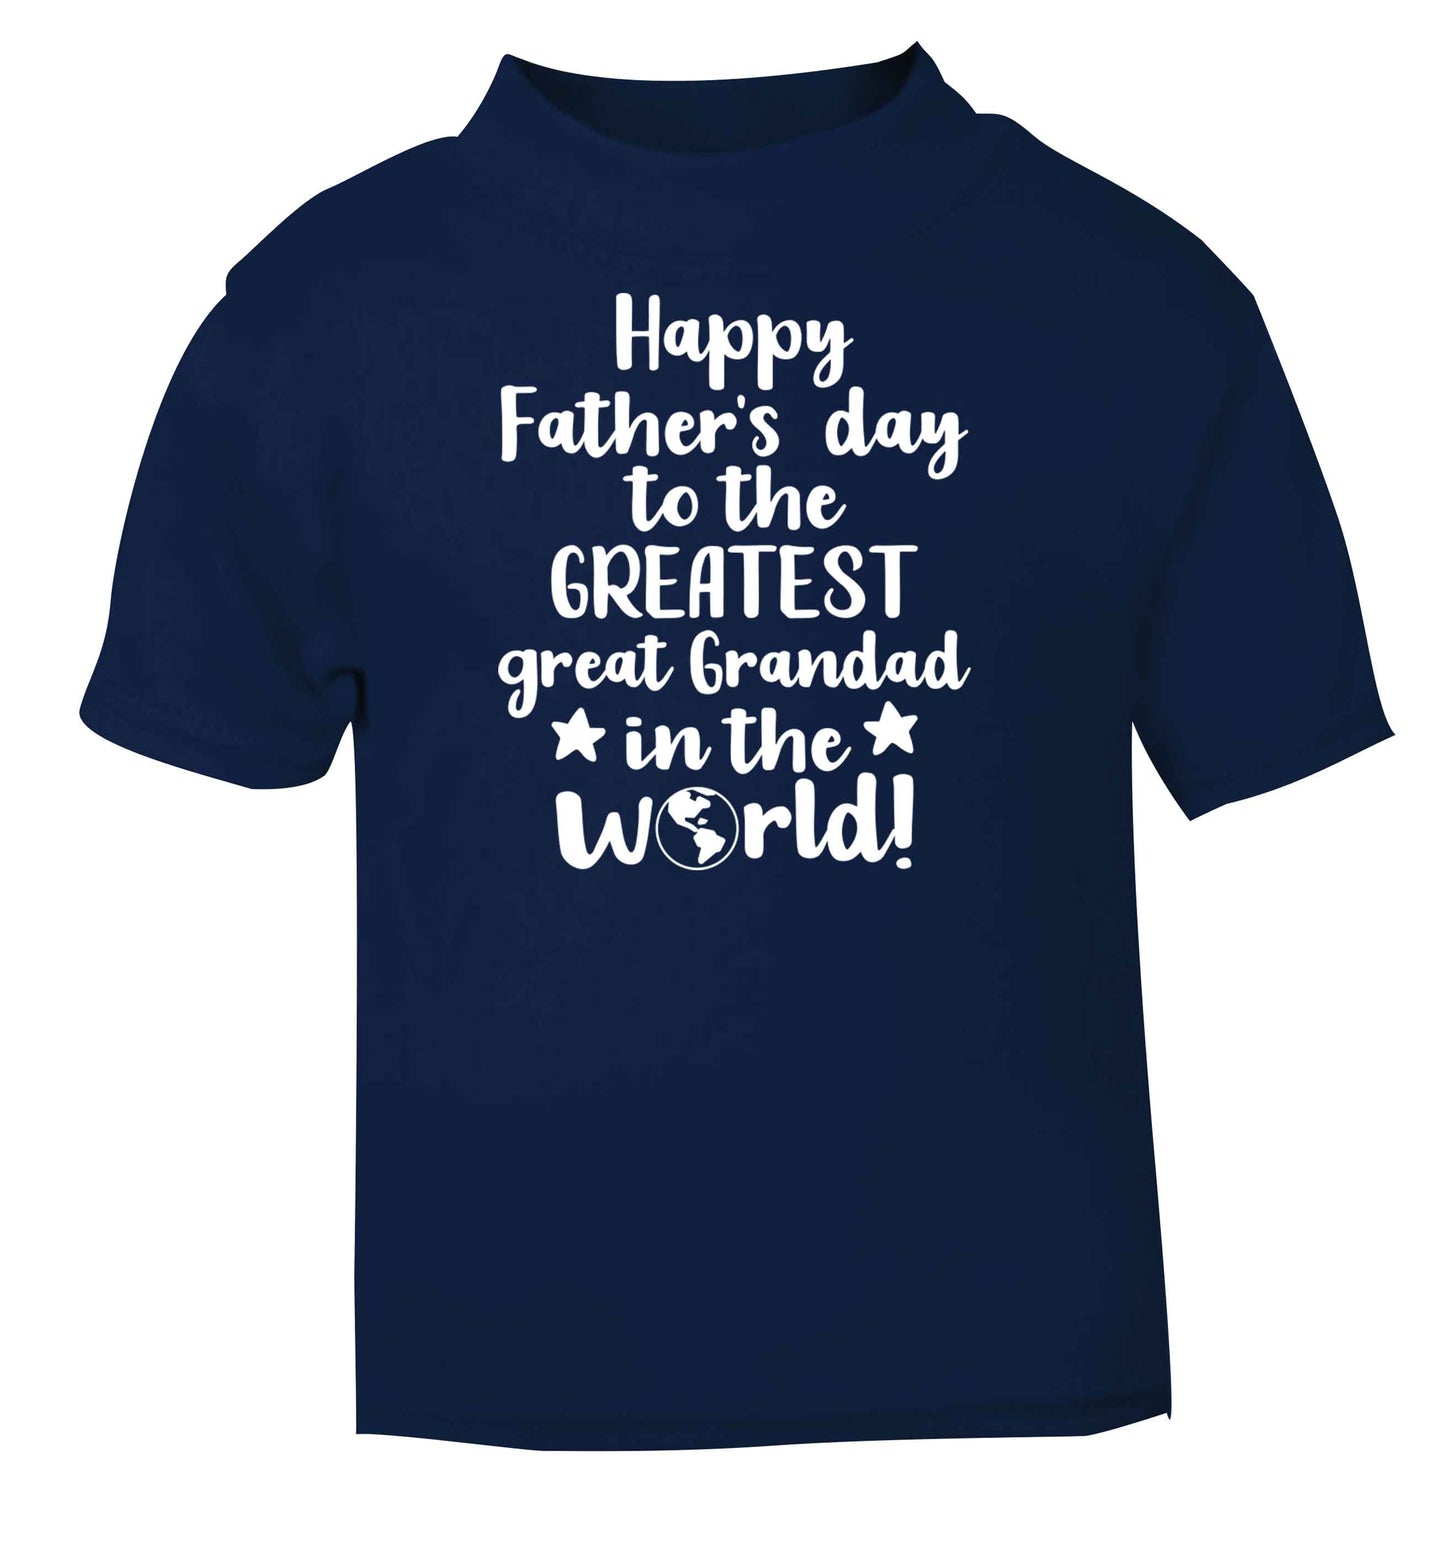 Happy Father's day to the greatest great grandad in the world navy baby toddler Tshirt 2 Years